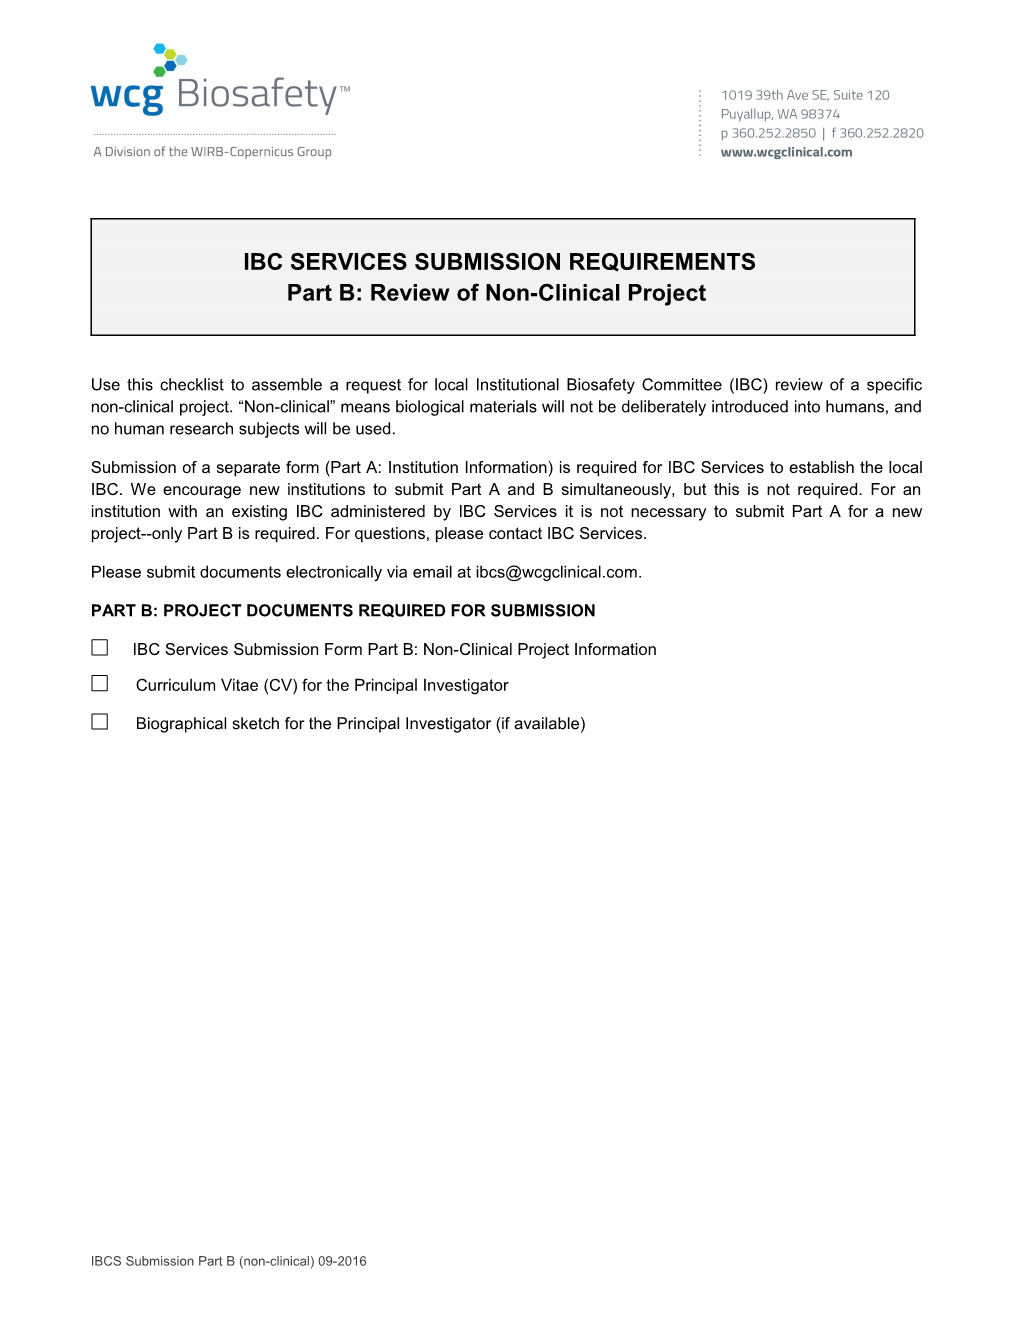 IBC Services SUBMISSION REQUIREMENTS